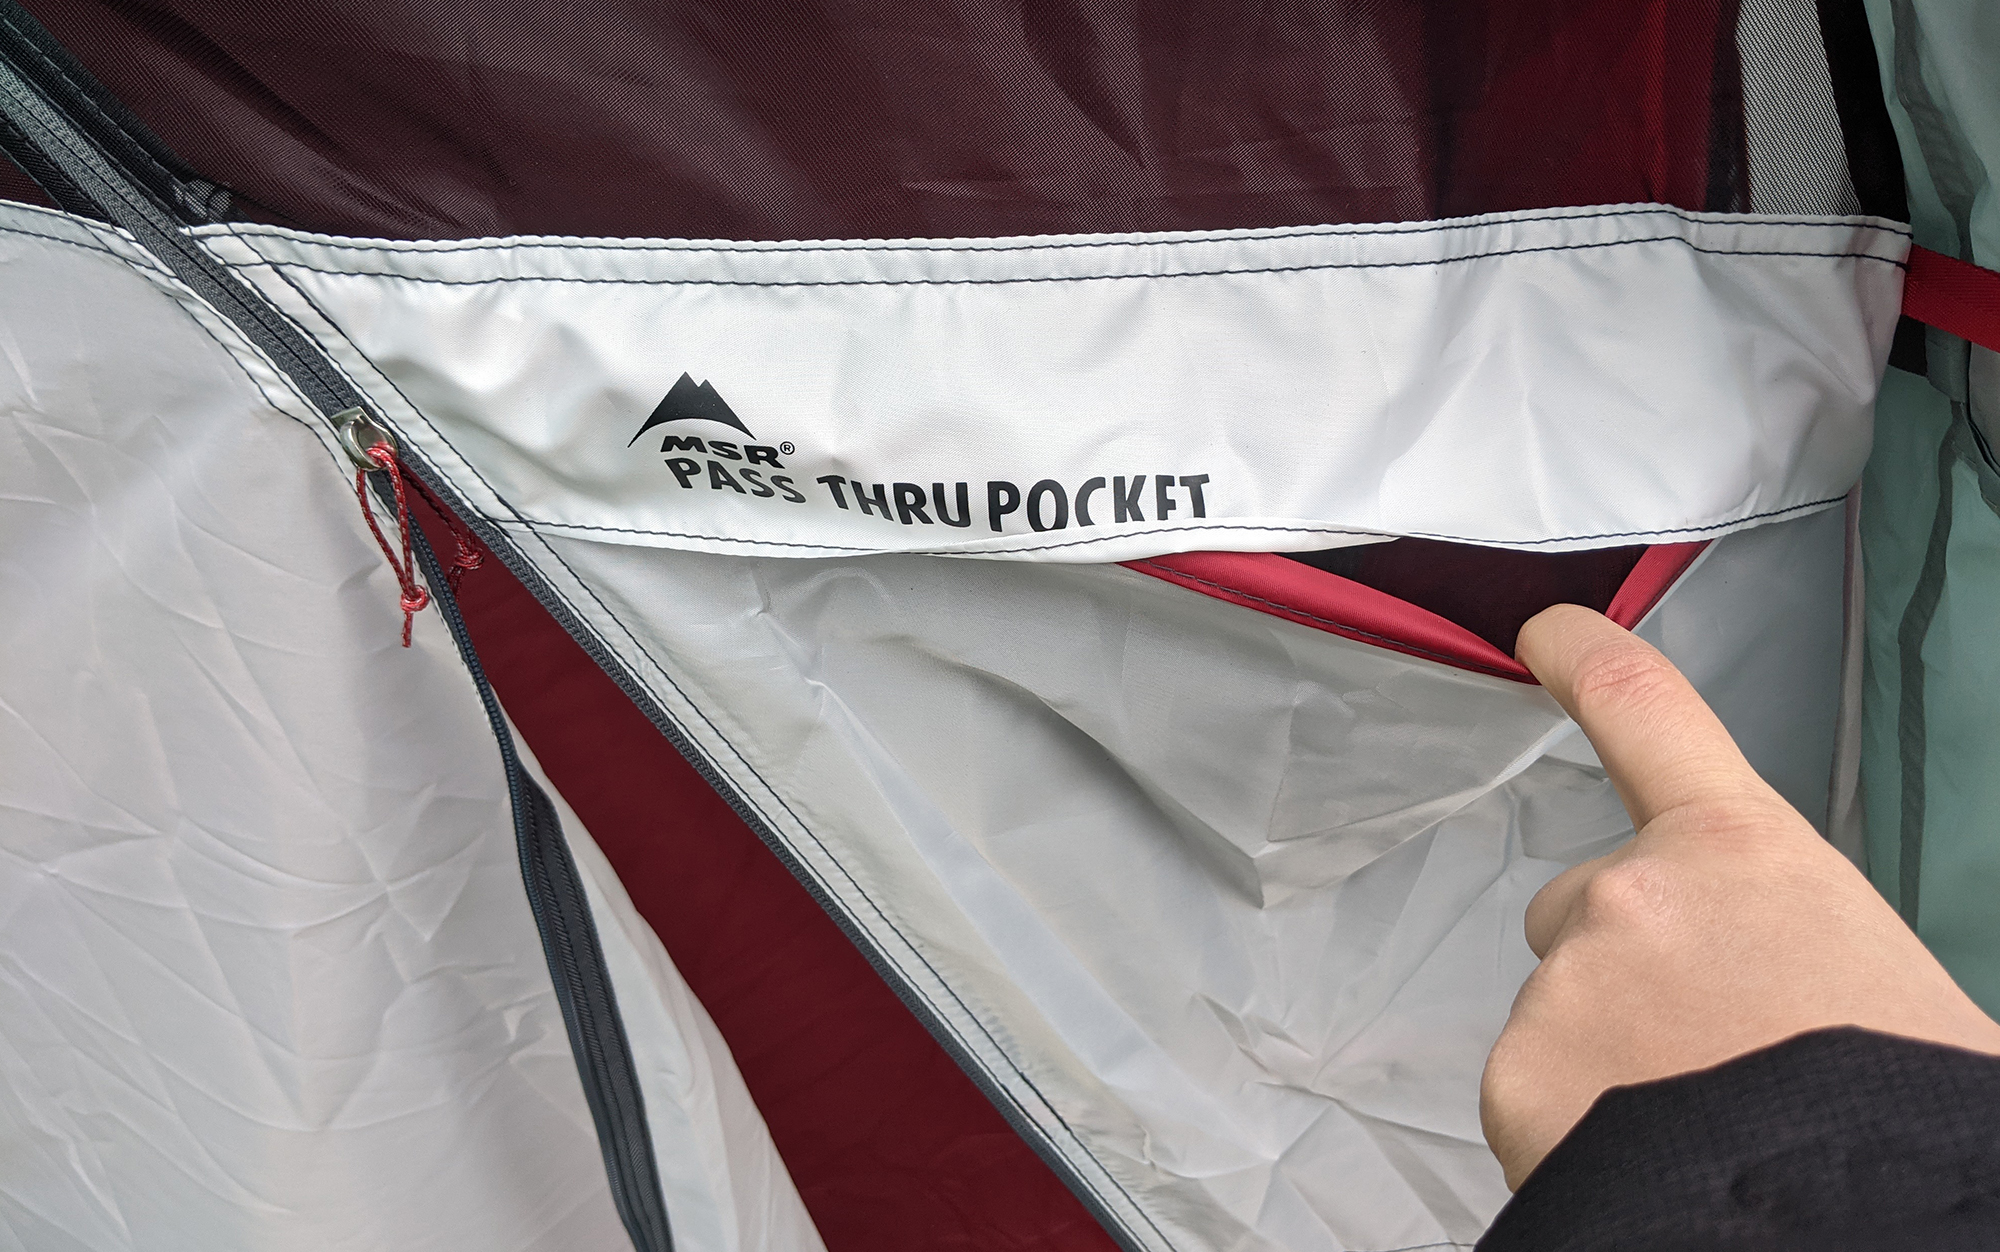 Grabbing your phone, sunglasses, or sunscreen out of the tent just got a lot easier with the MSR Habiscapeâs pass-through pocket.